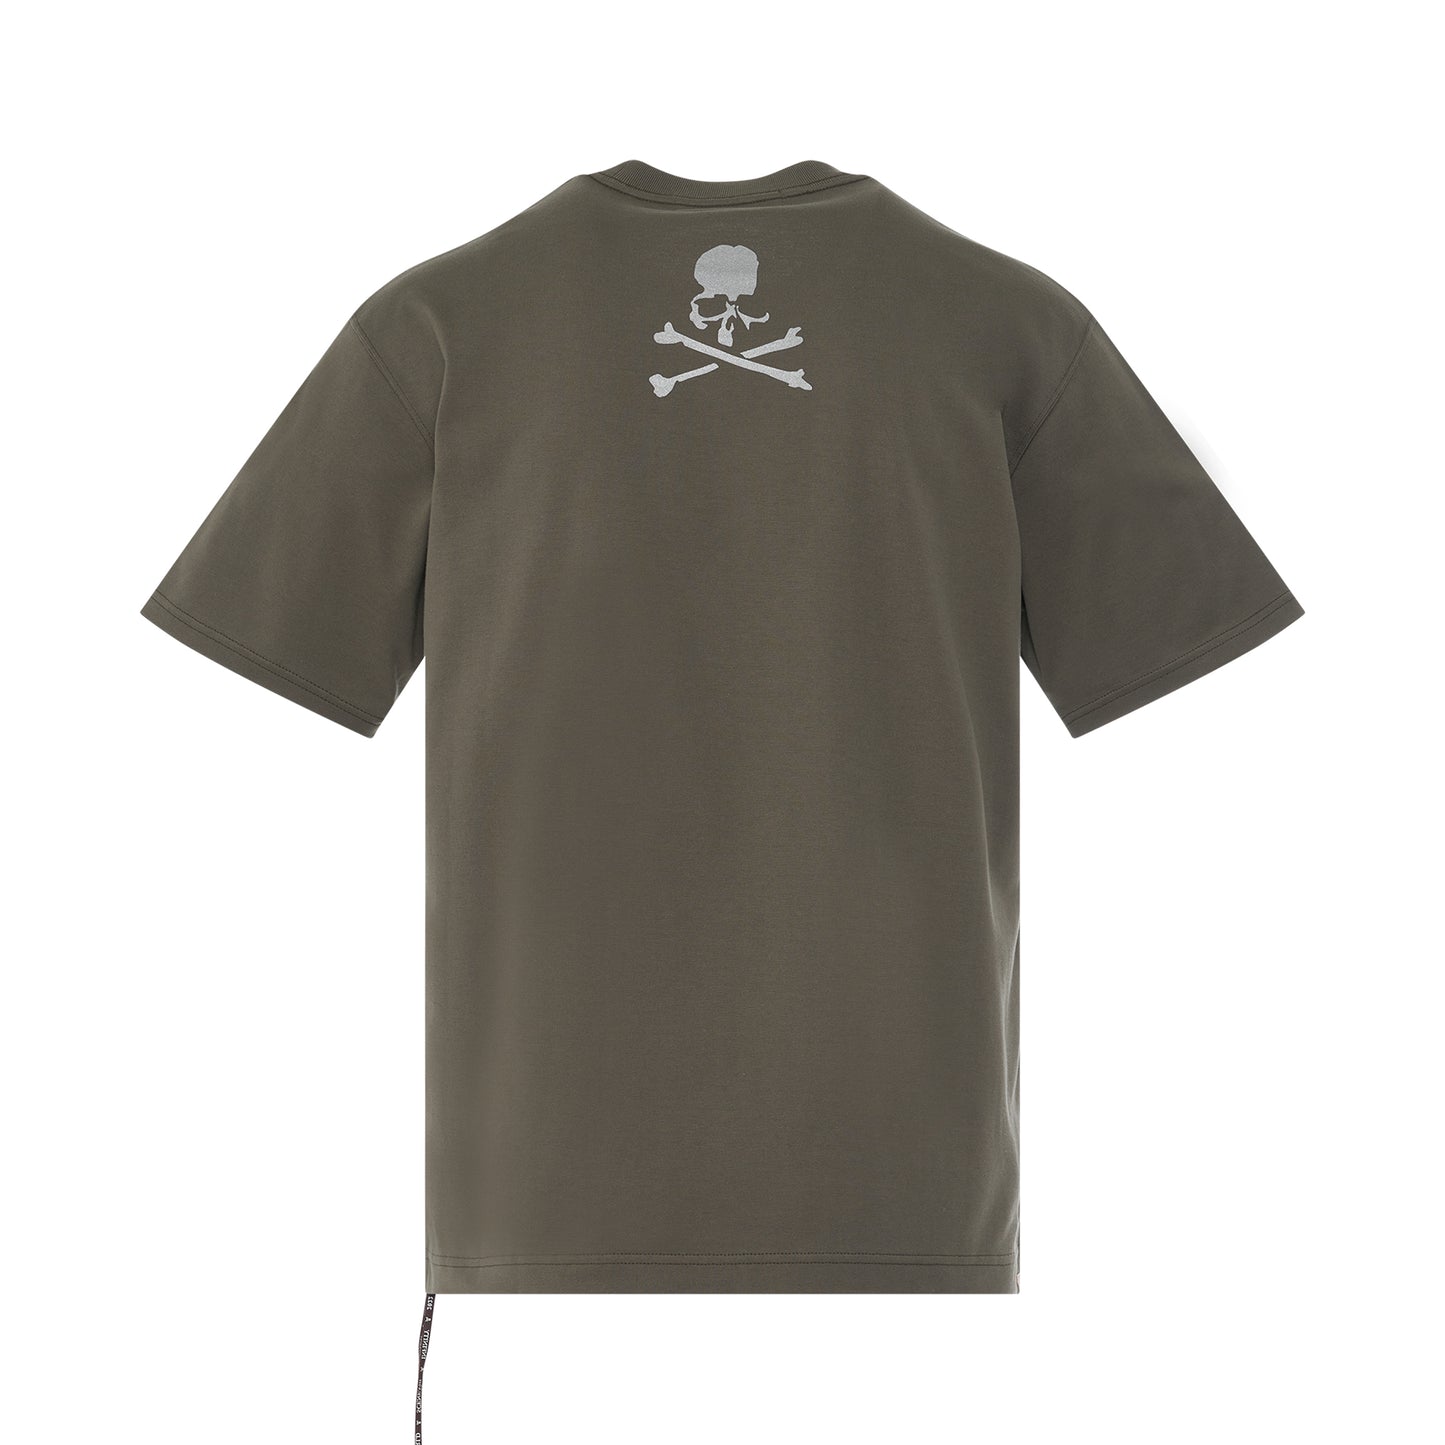 Reflective Skull T-Shirt in Olive